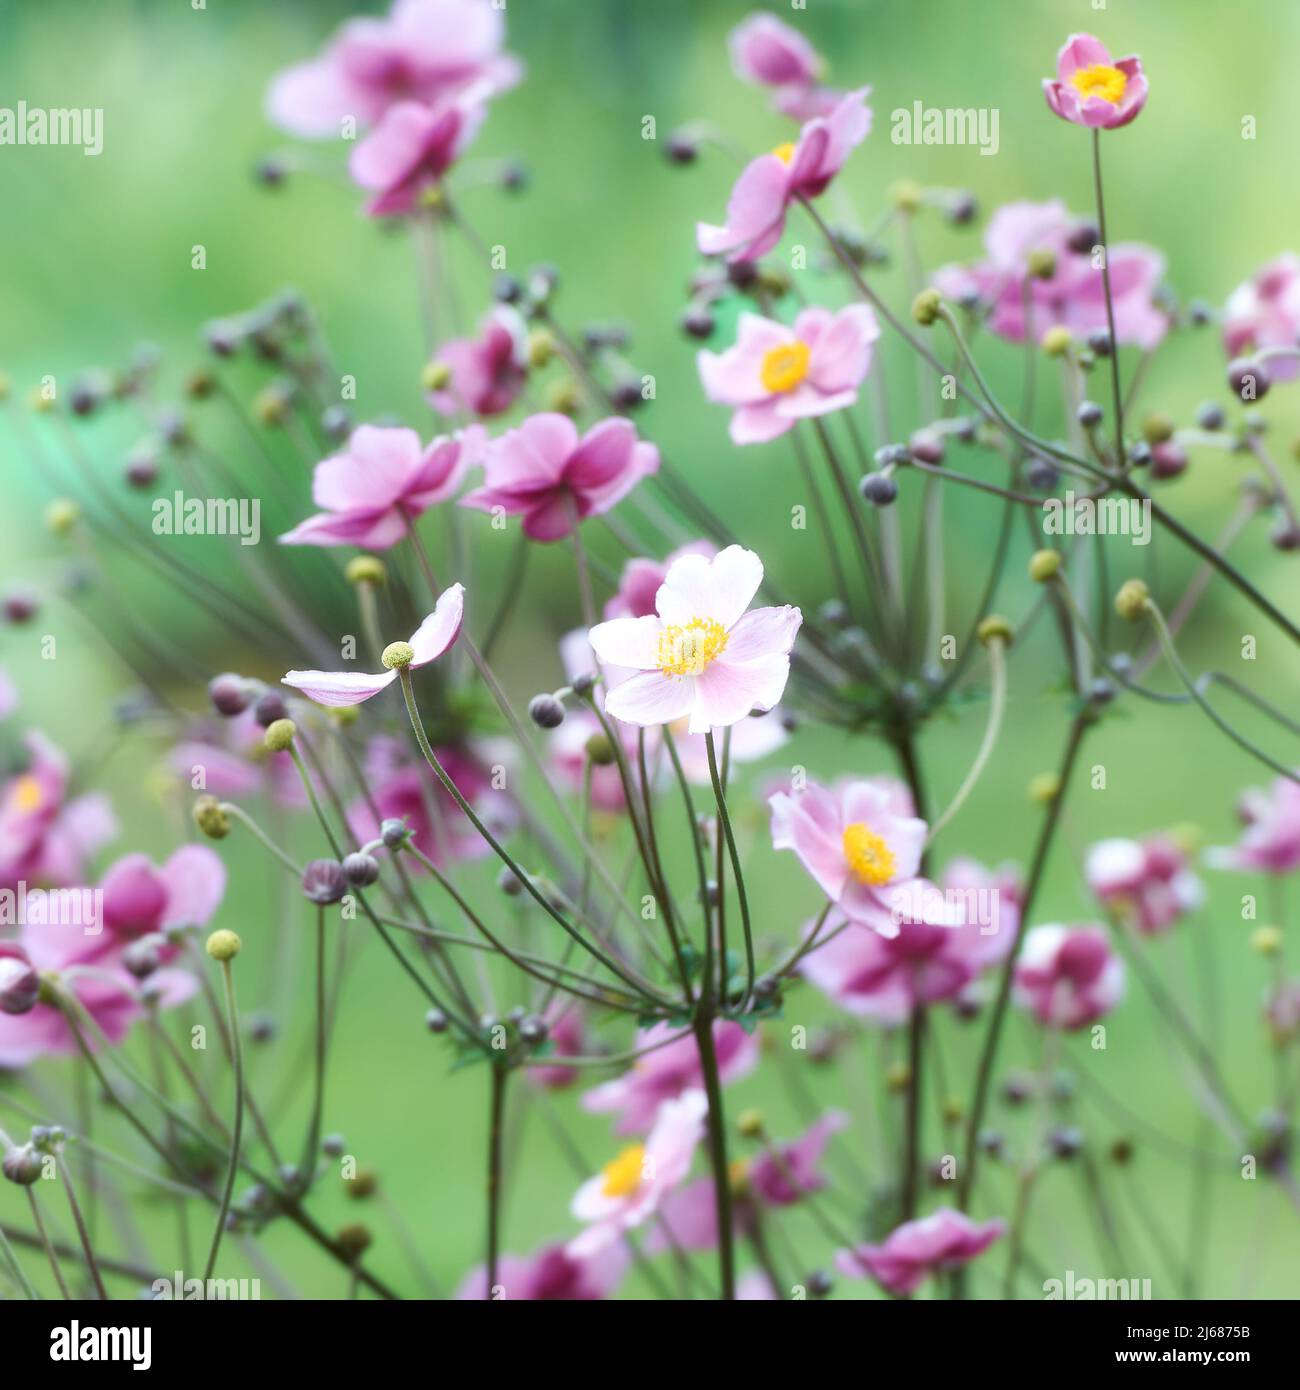 Nature background with spring flowers. (Anemone scabiosa). Selective and soft focus. Stock Photo